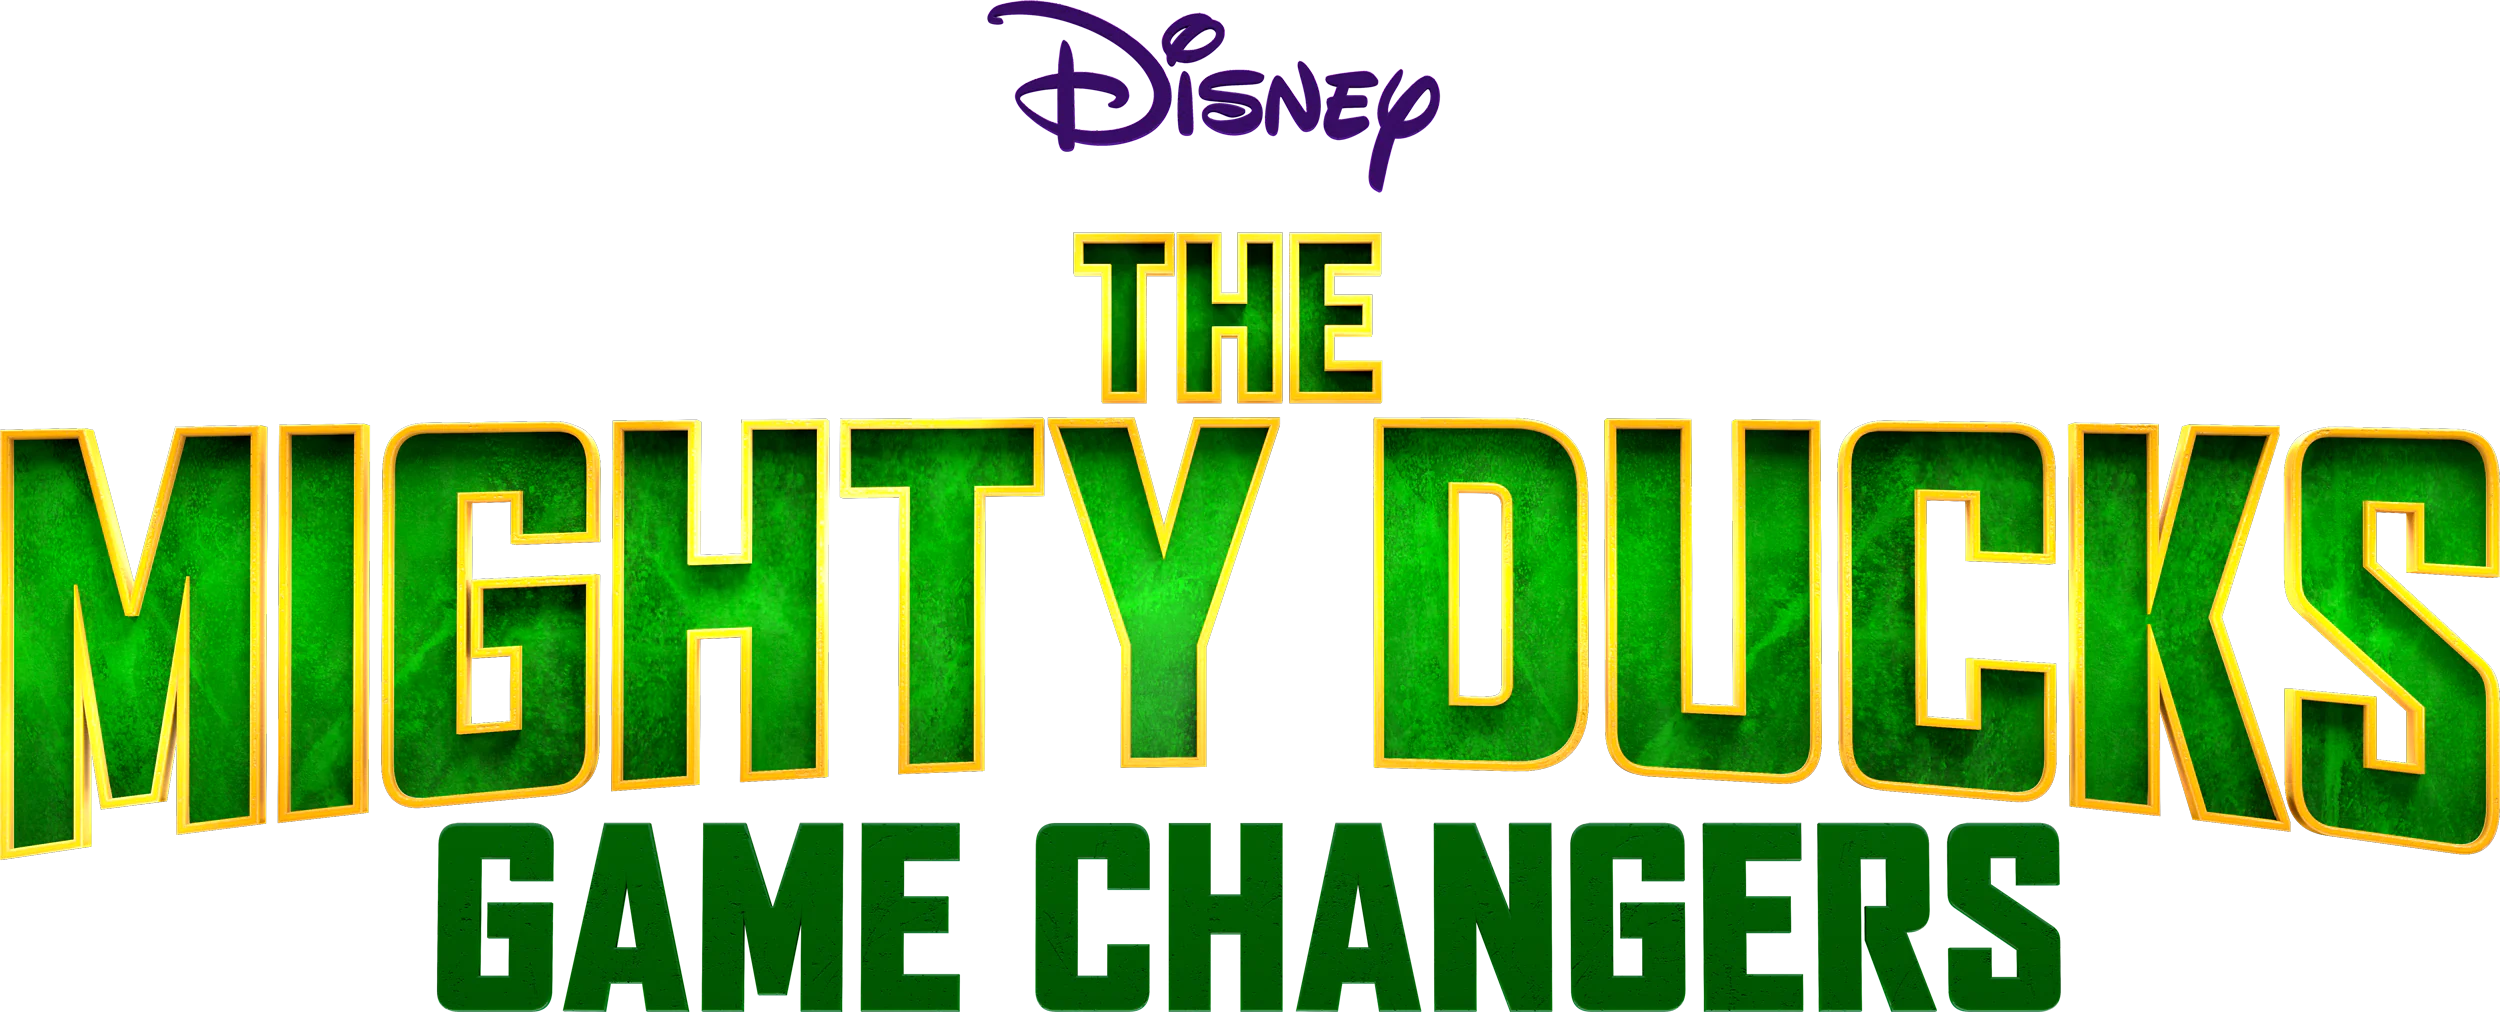 Big Shot,' 'Mighty Ducks: Game Changers' Canceled at Disney+